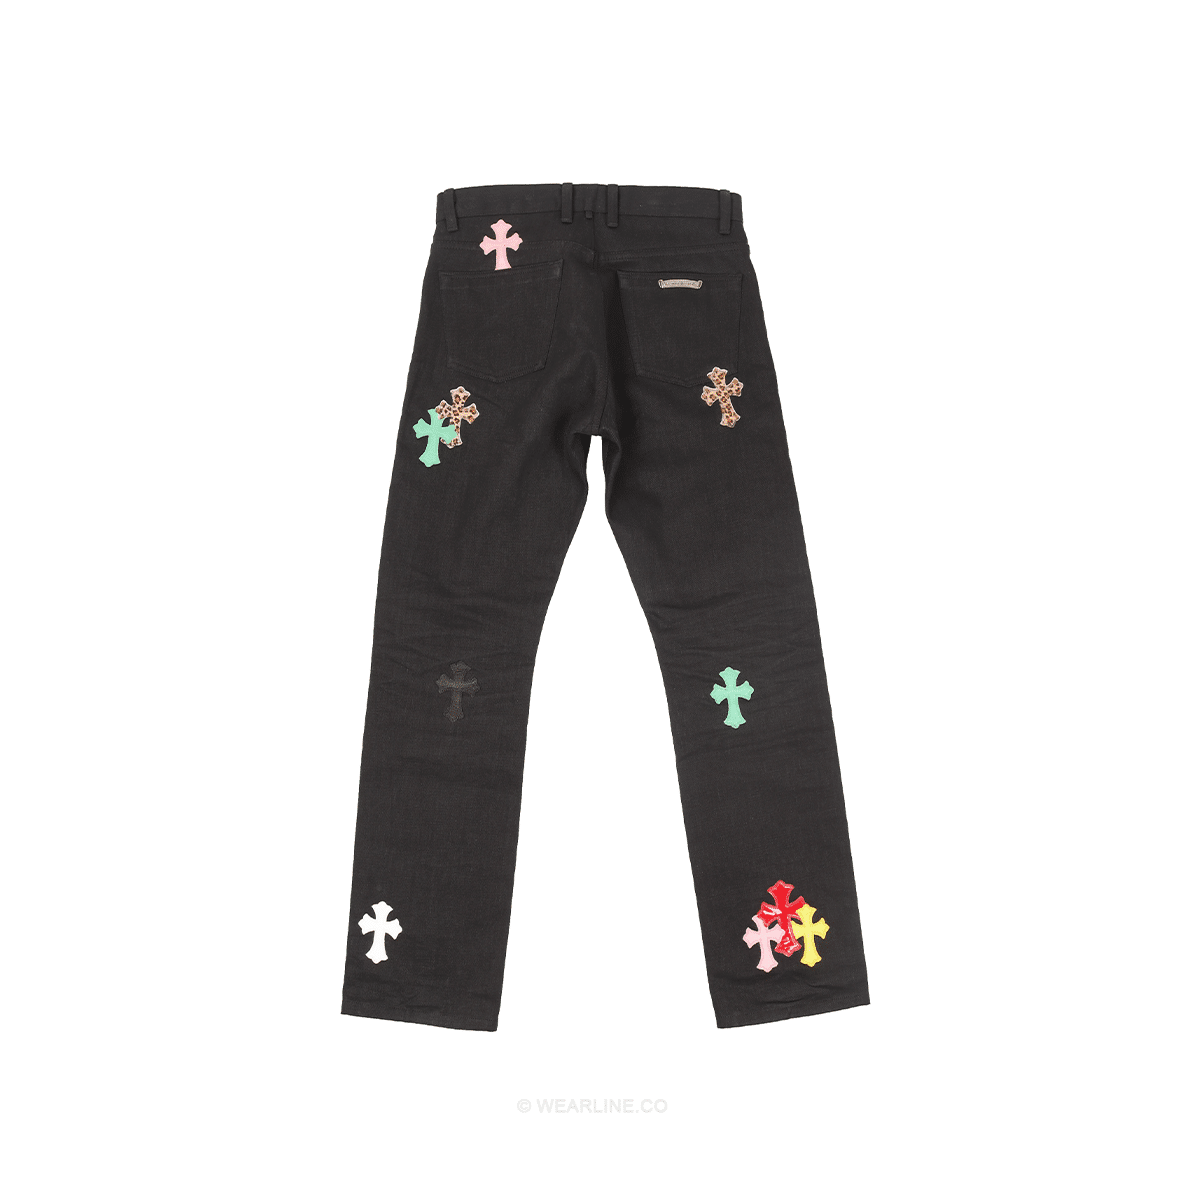 CHROME HEARTS BLACK JEANS IN LIGTH BLUE RED YELLOW LEATHER CROSS